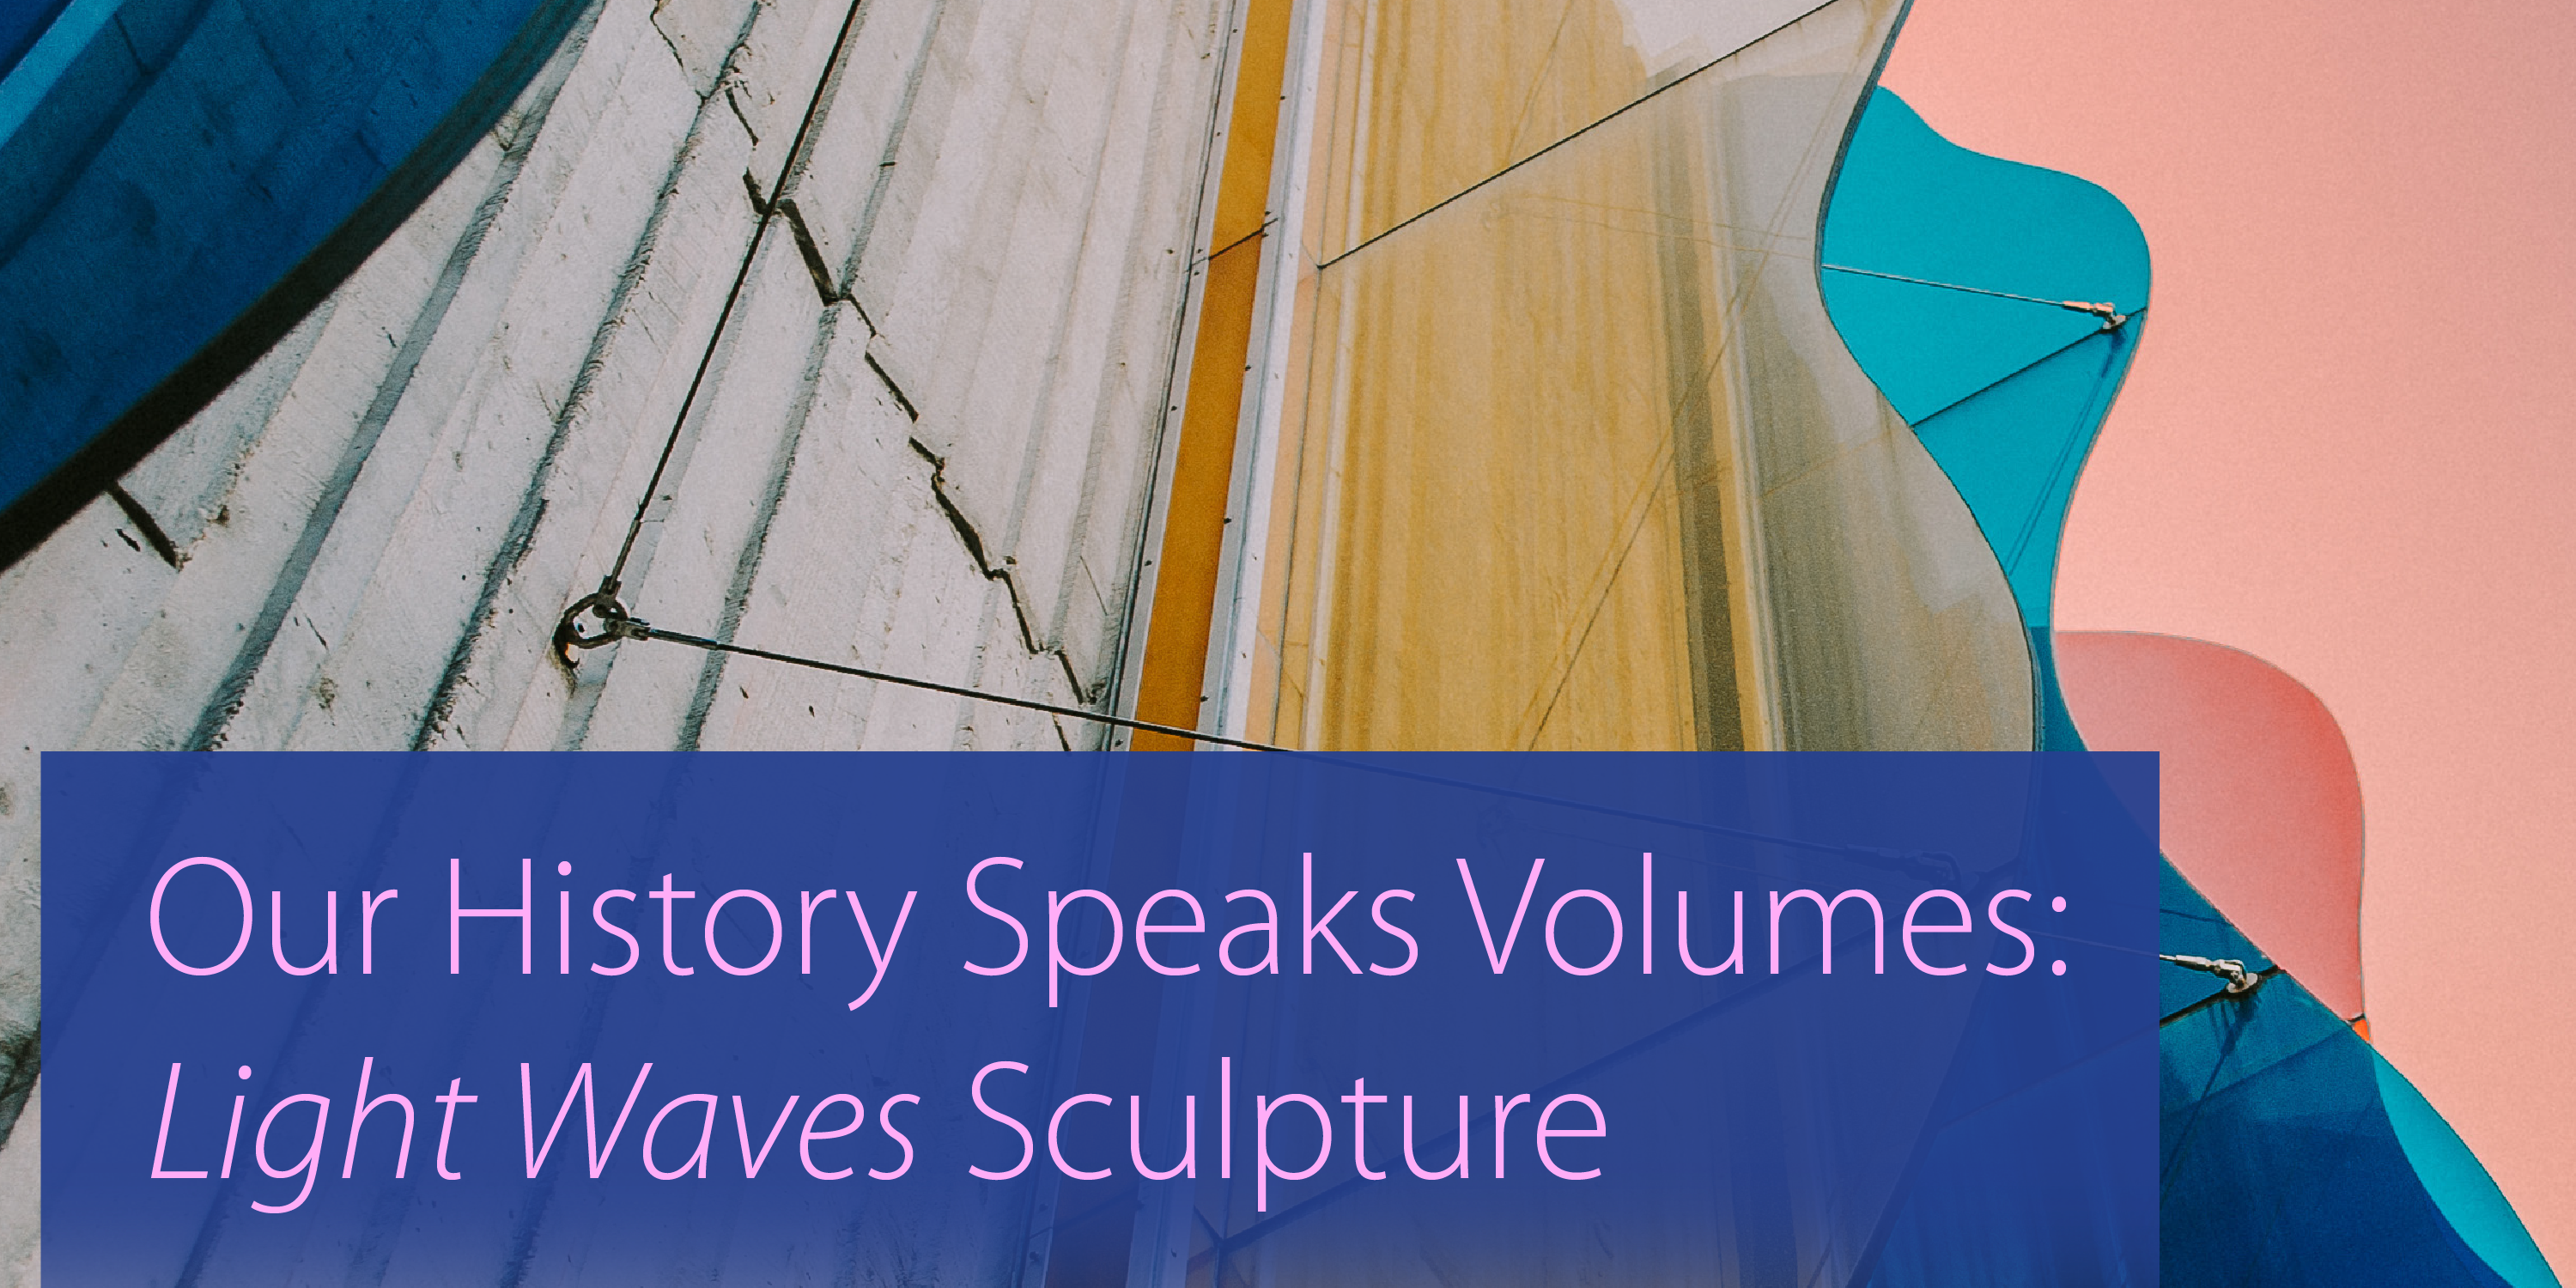 Our History Speaks Volumes: Light Waves Sculpture